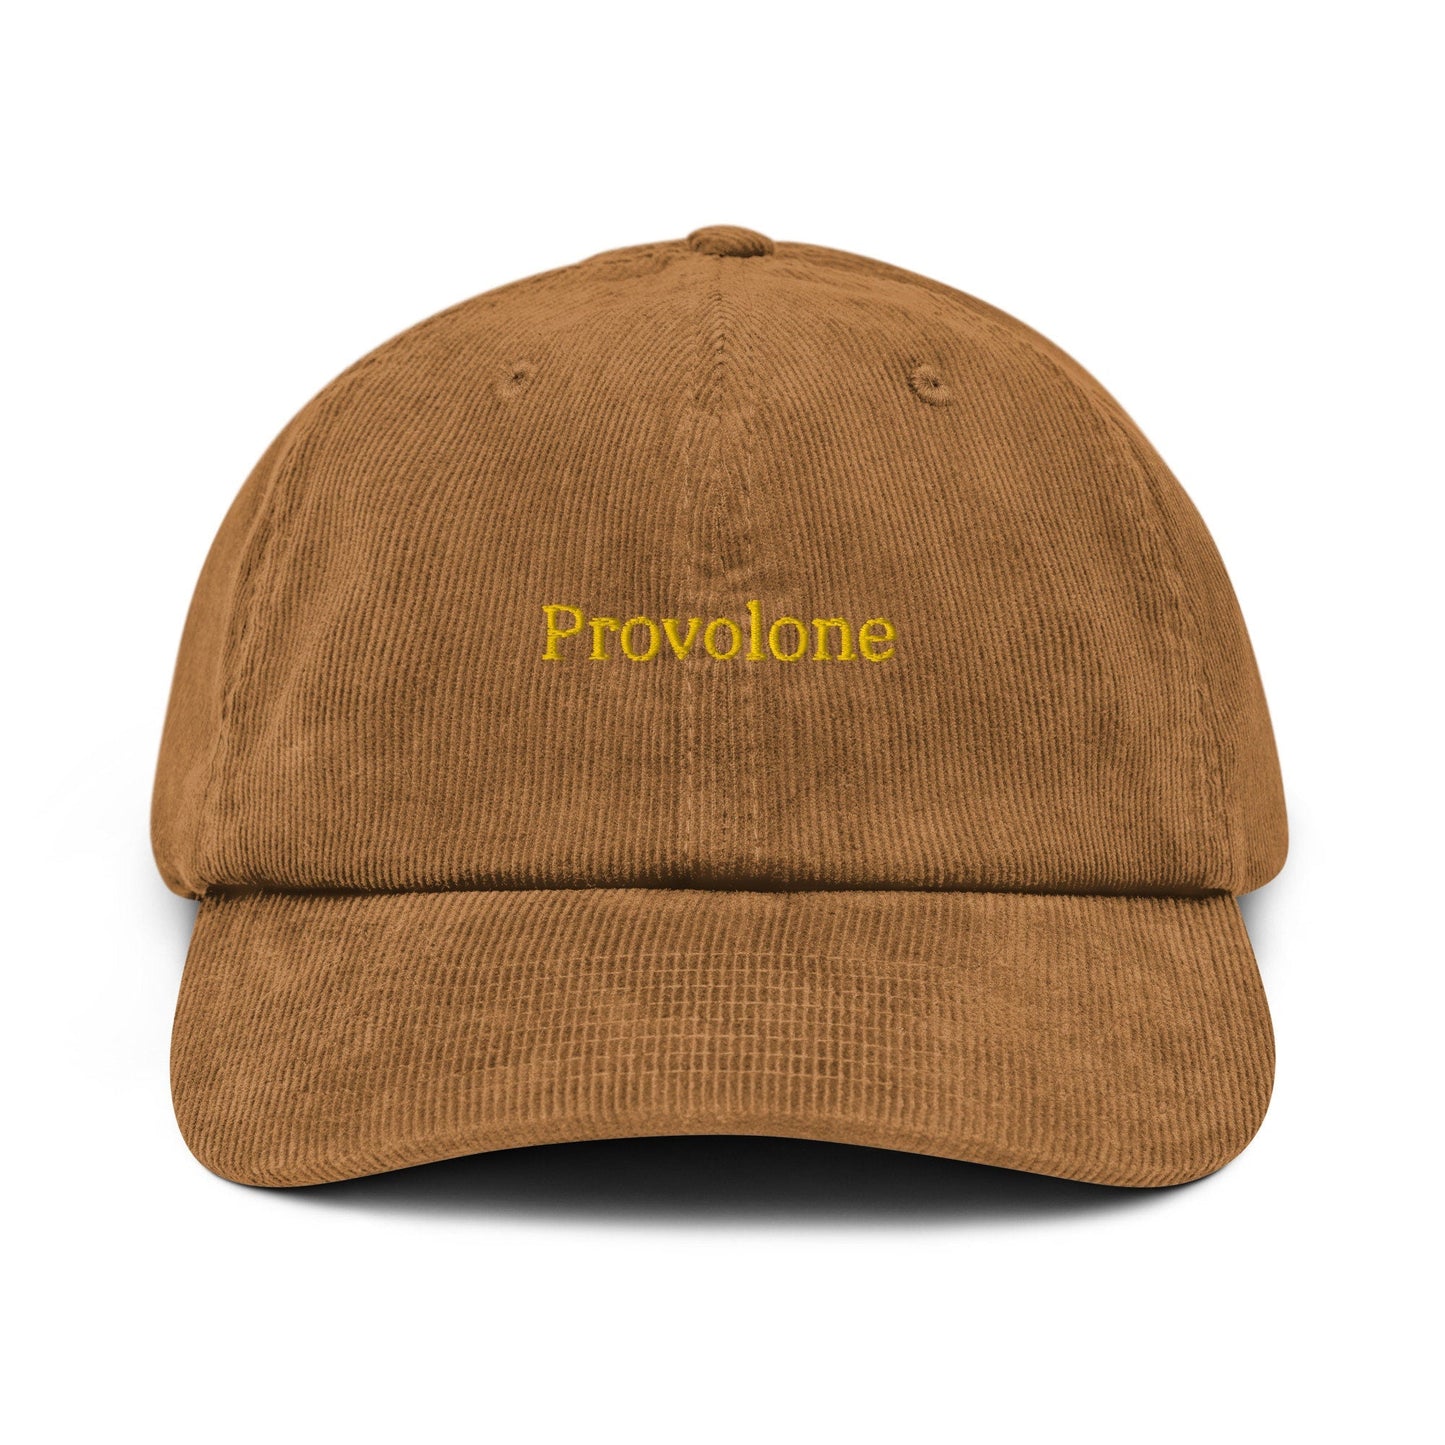 Provolone Corduroy Dad Hat - Gift for Italian charcuterie and cheese food Lovers - Handmade Embroidered Cap - Evilwater Originals